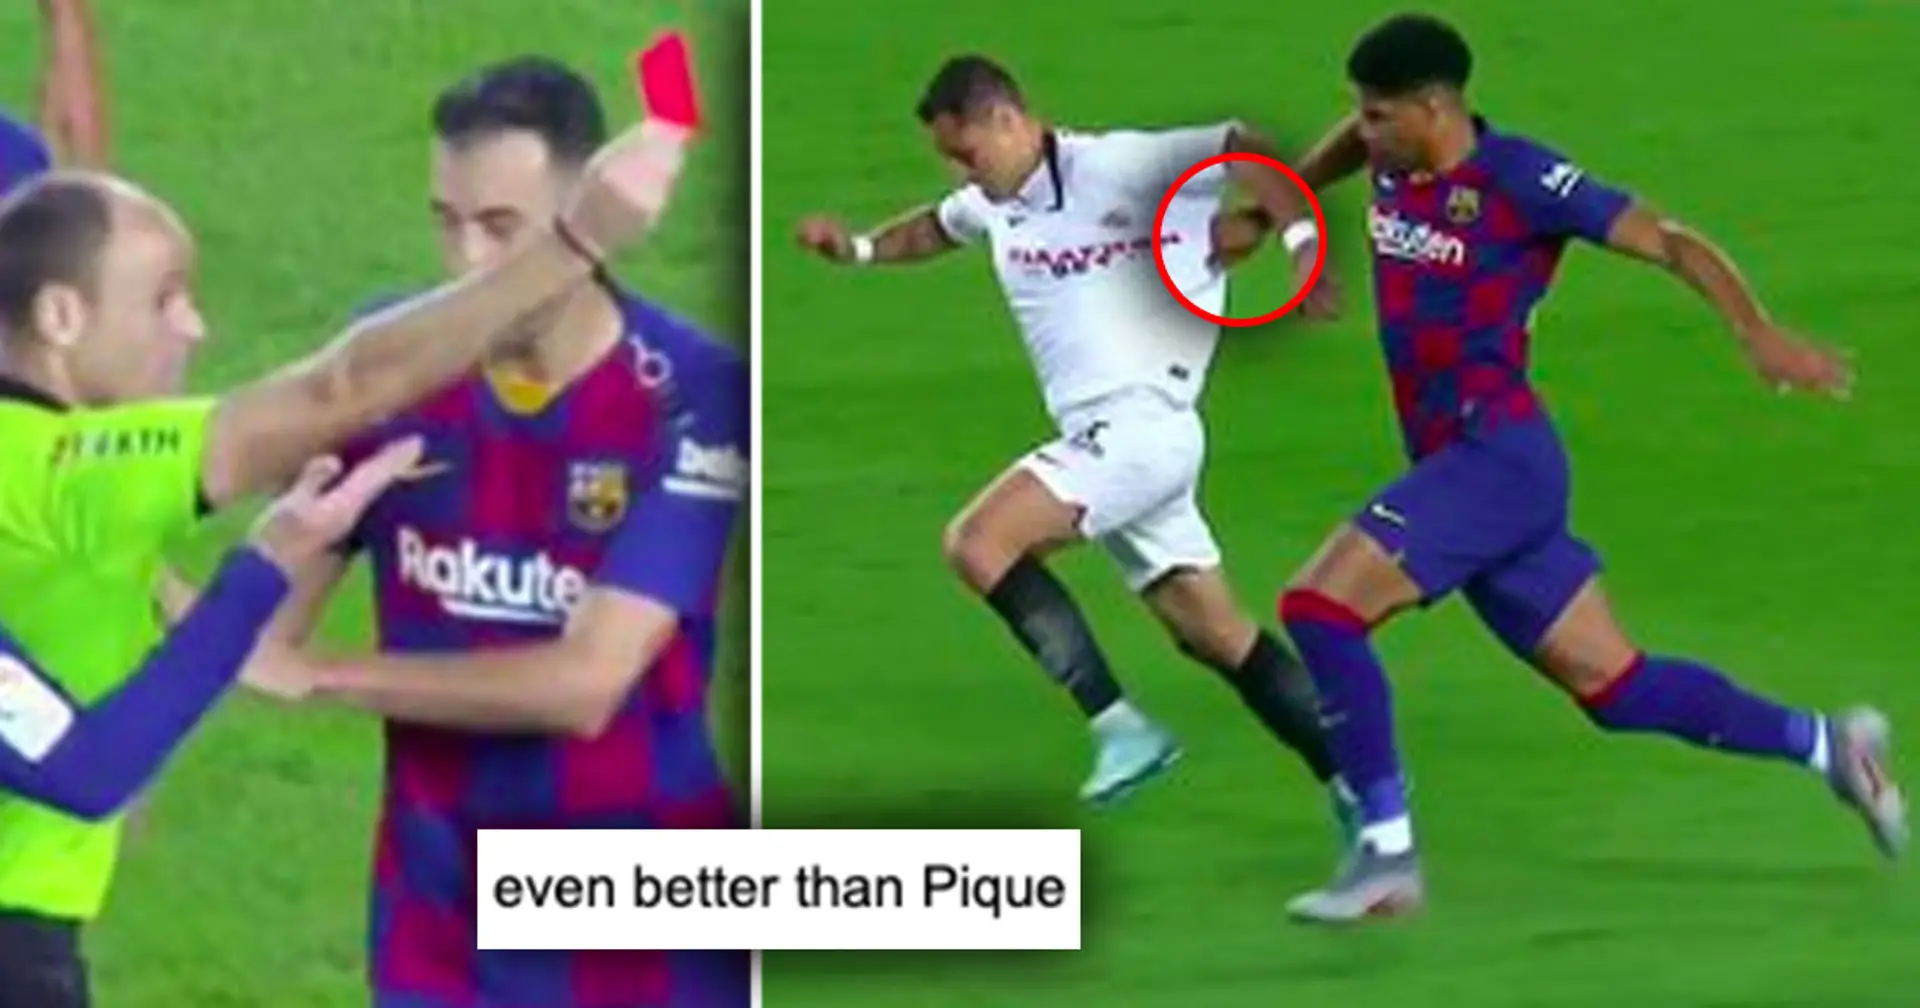 2 shocking predictions on Araujo fan made in 2019 – that was his debut and he got a red card